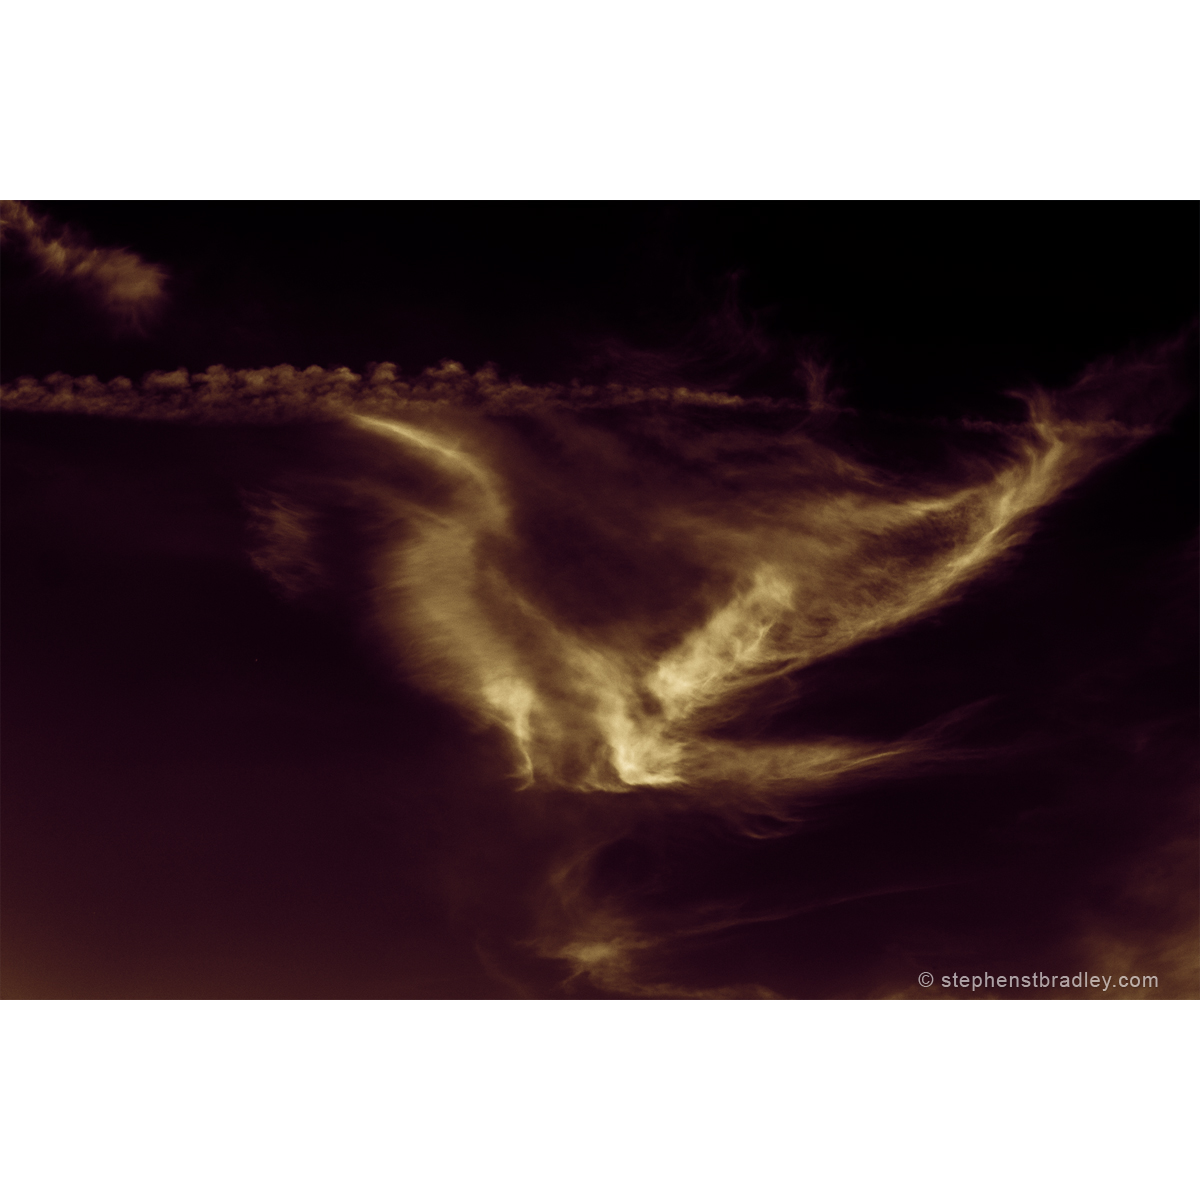 Freesoar - limited edition photographic print of birdlike cloud formation over Newtownabbey, Northern Ireland